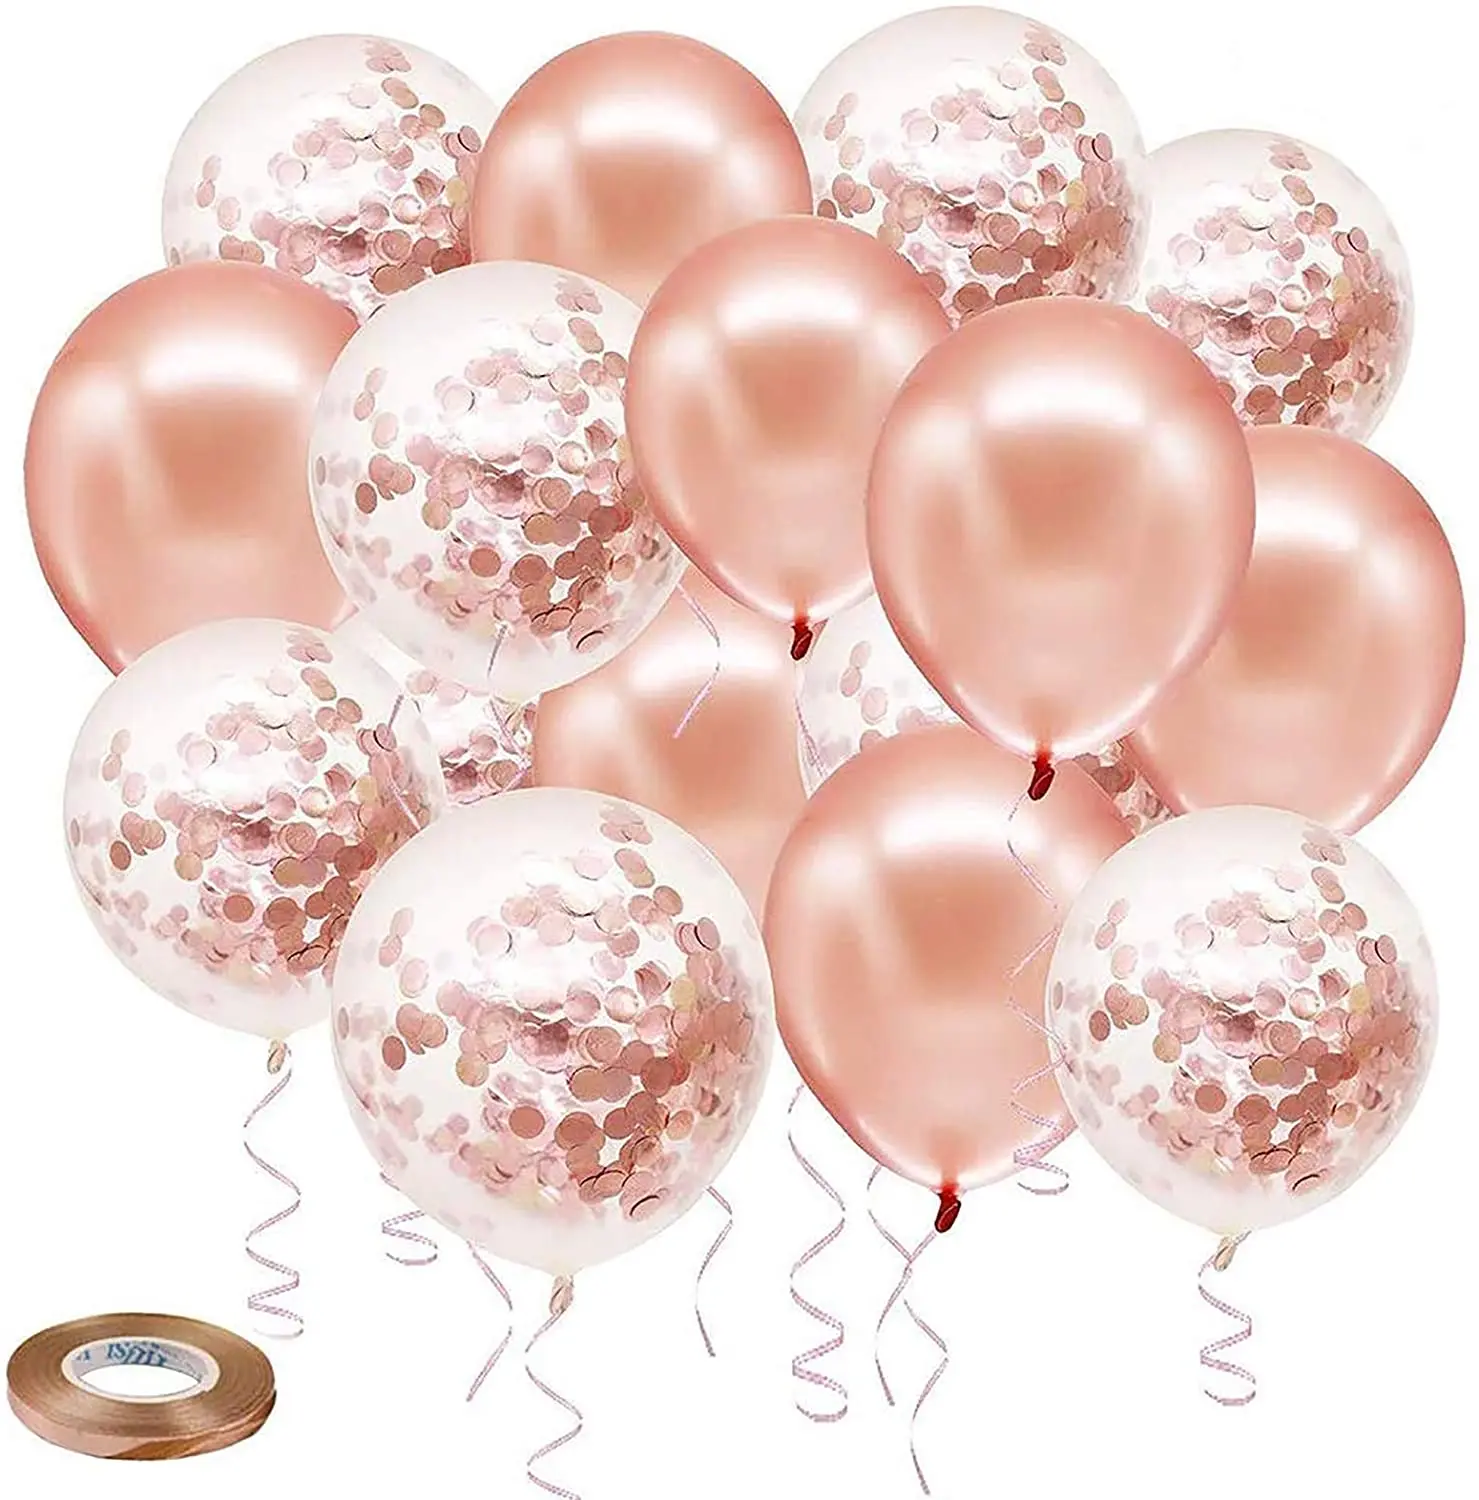 Rose Gold and Gold Happy Birthday Balloon Bouquet